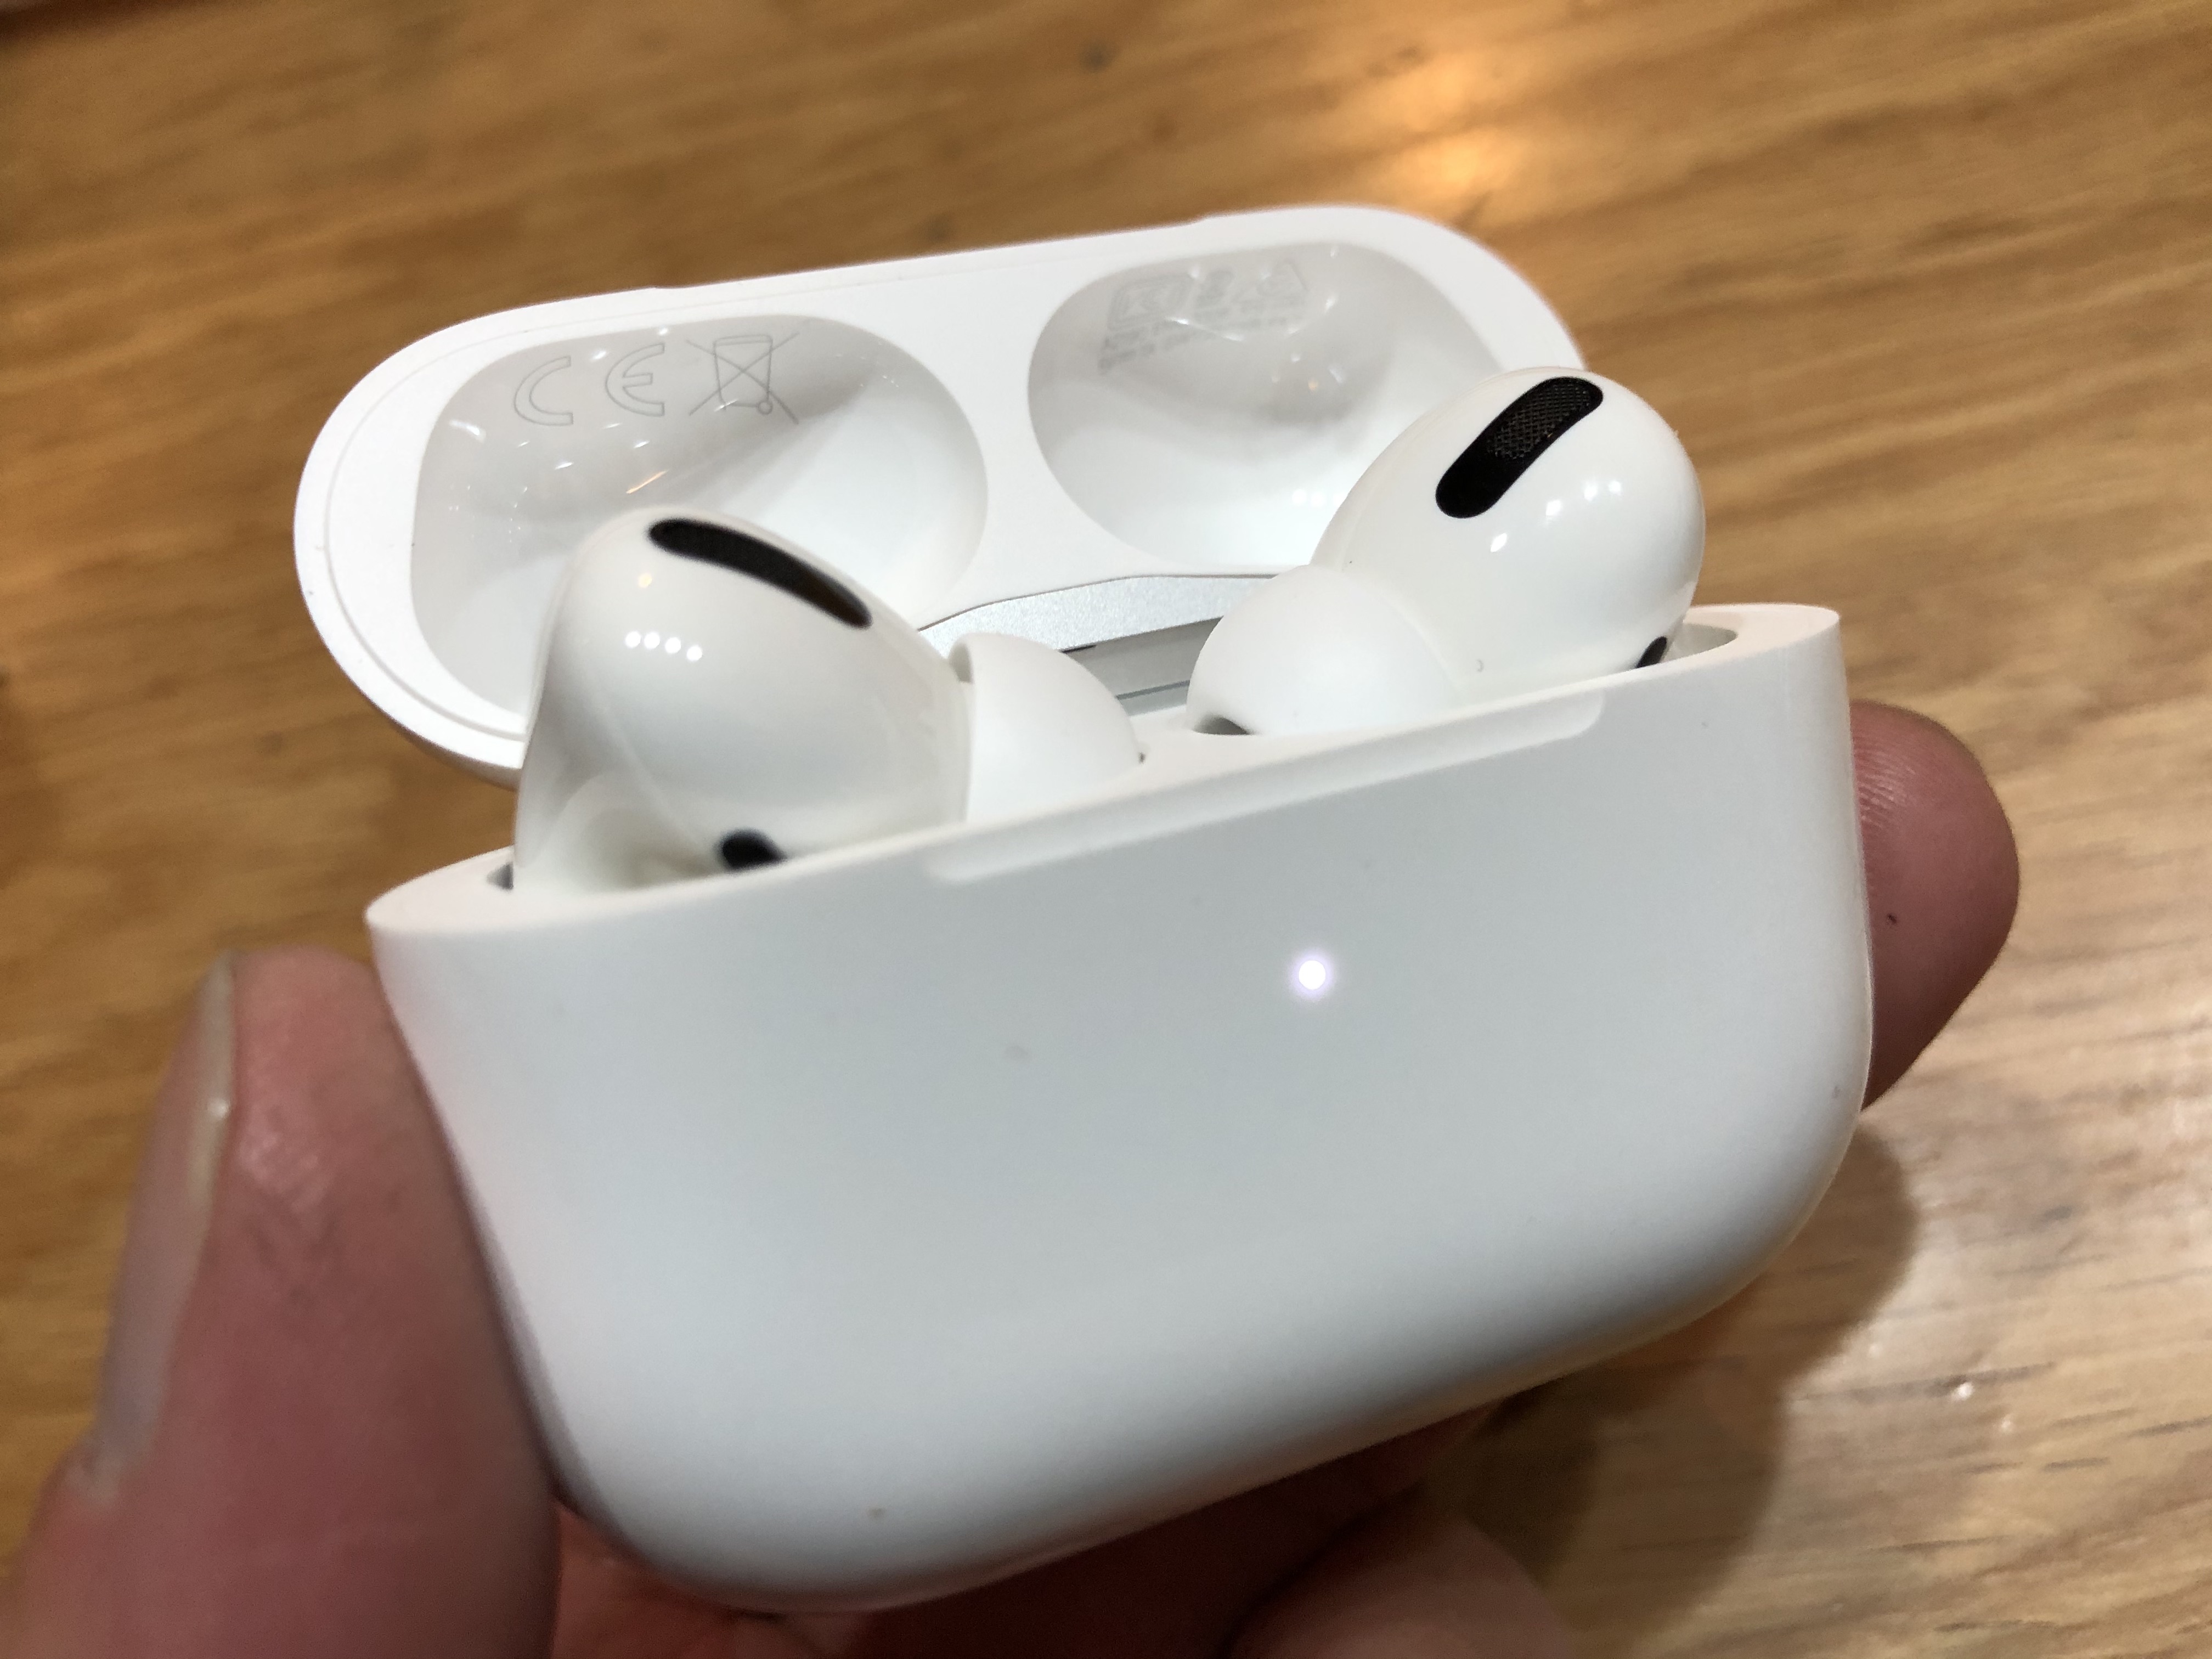 AirPods Pro購入！使用感や機能、AirPodsからの変更点などをレビュー | 和mily camp